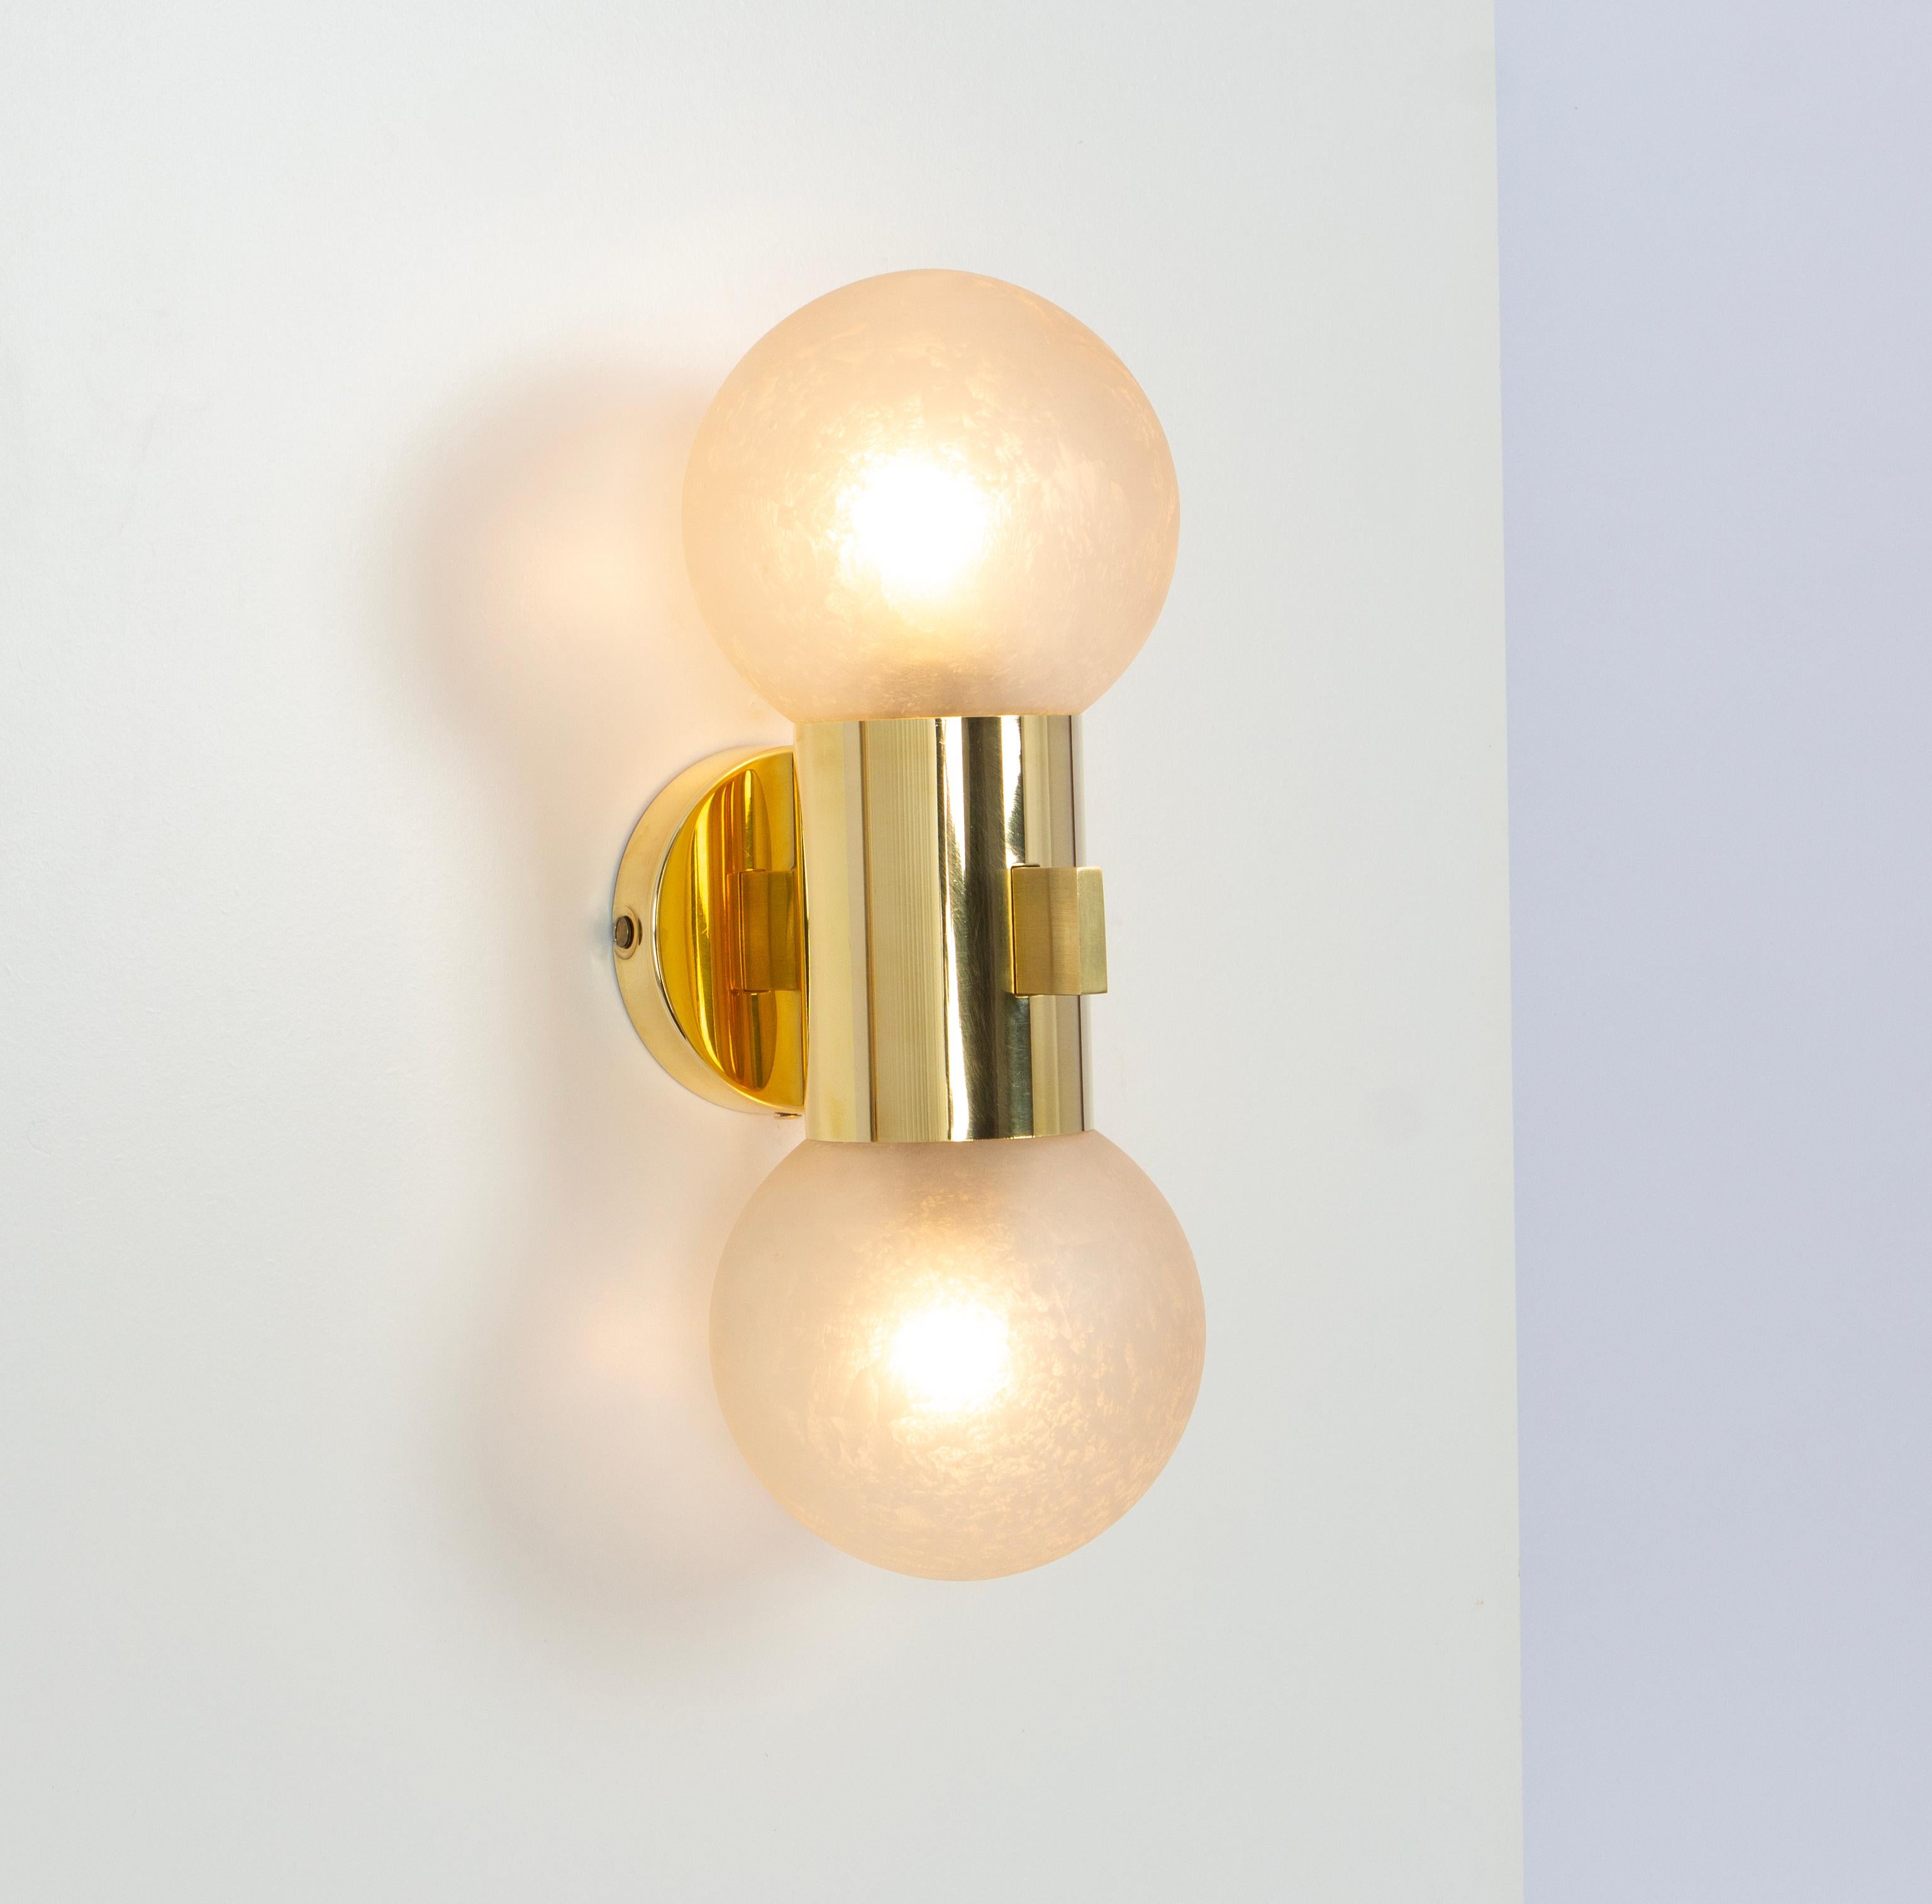 Pair of Brass and Satin Glass Sconces, Sciolari Stil, Germany, 1970s For Sale 3